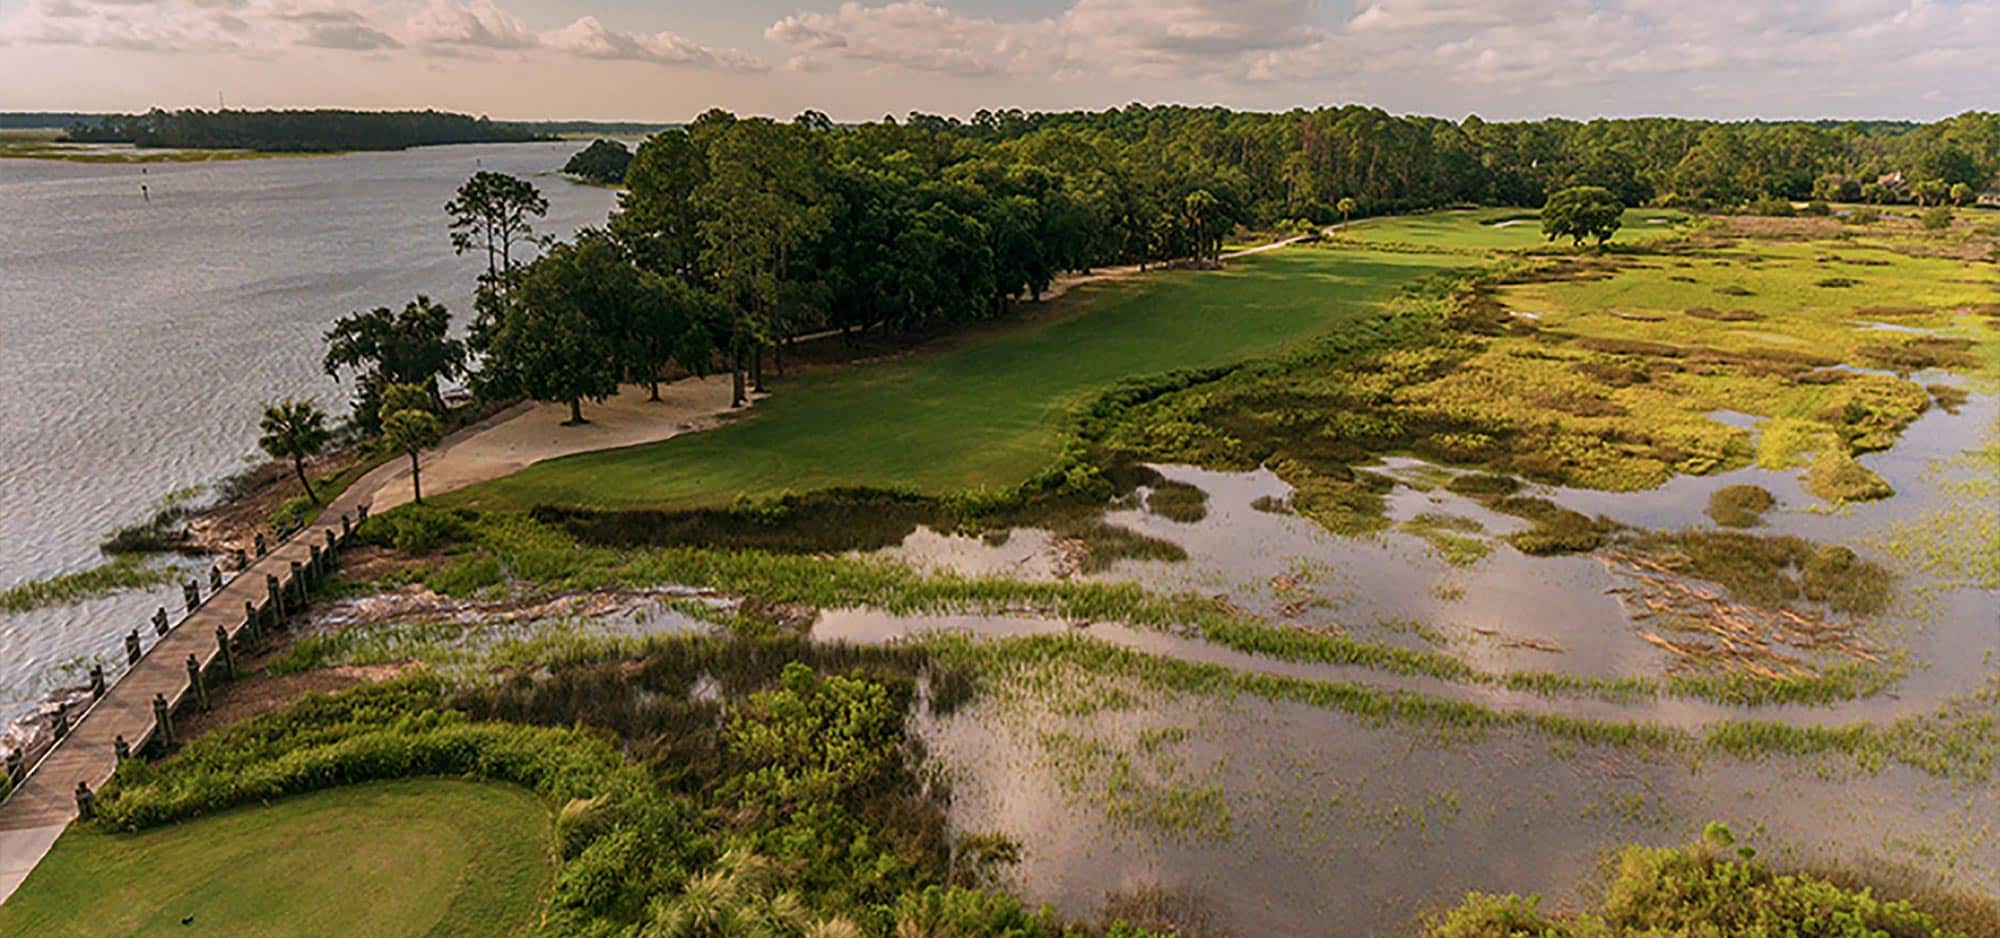 The Oakridge course features water, bunkers, marsh, and a split-level fairway next to a path along the Intracoastal waterway.